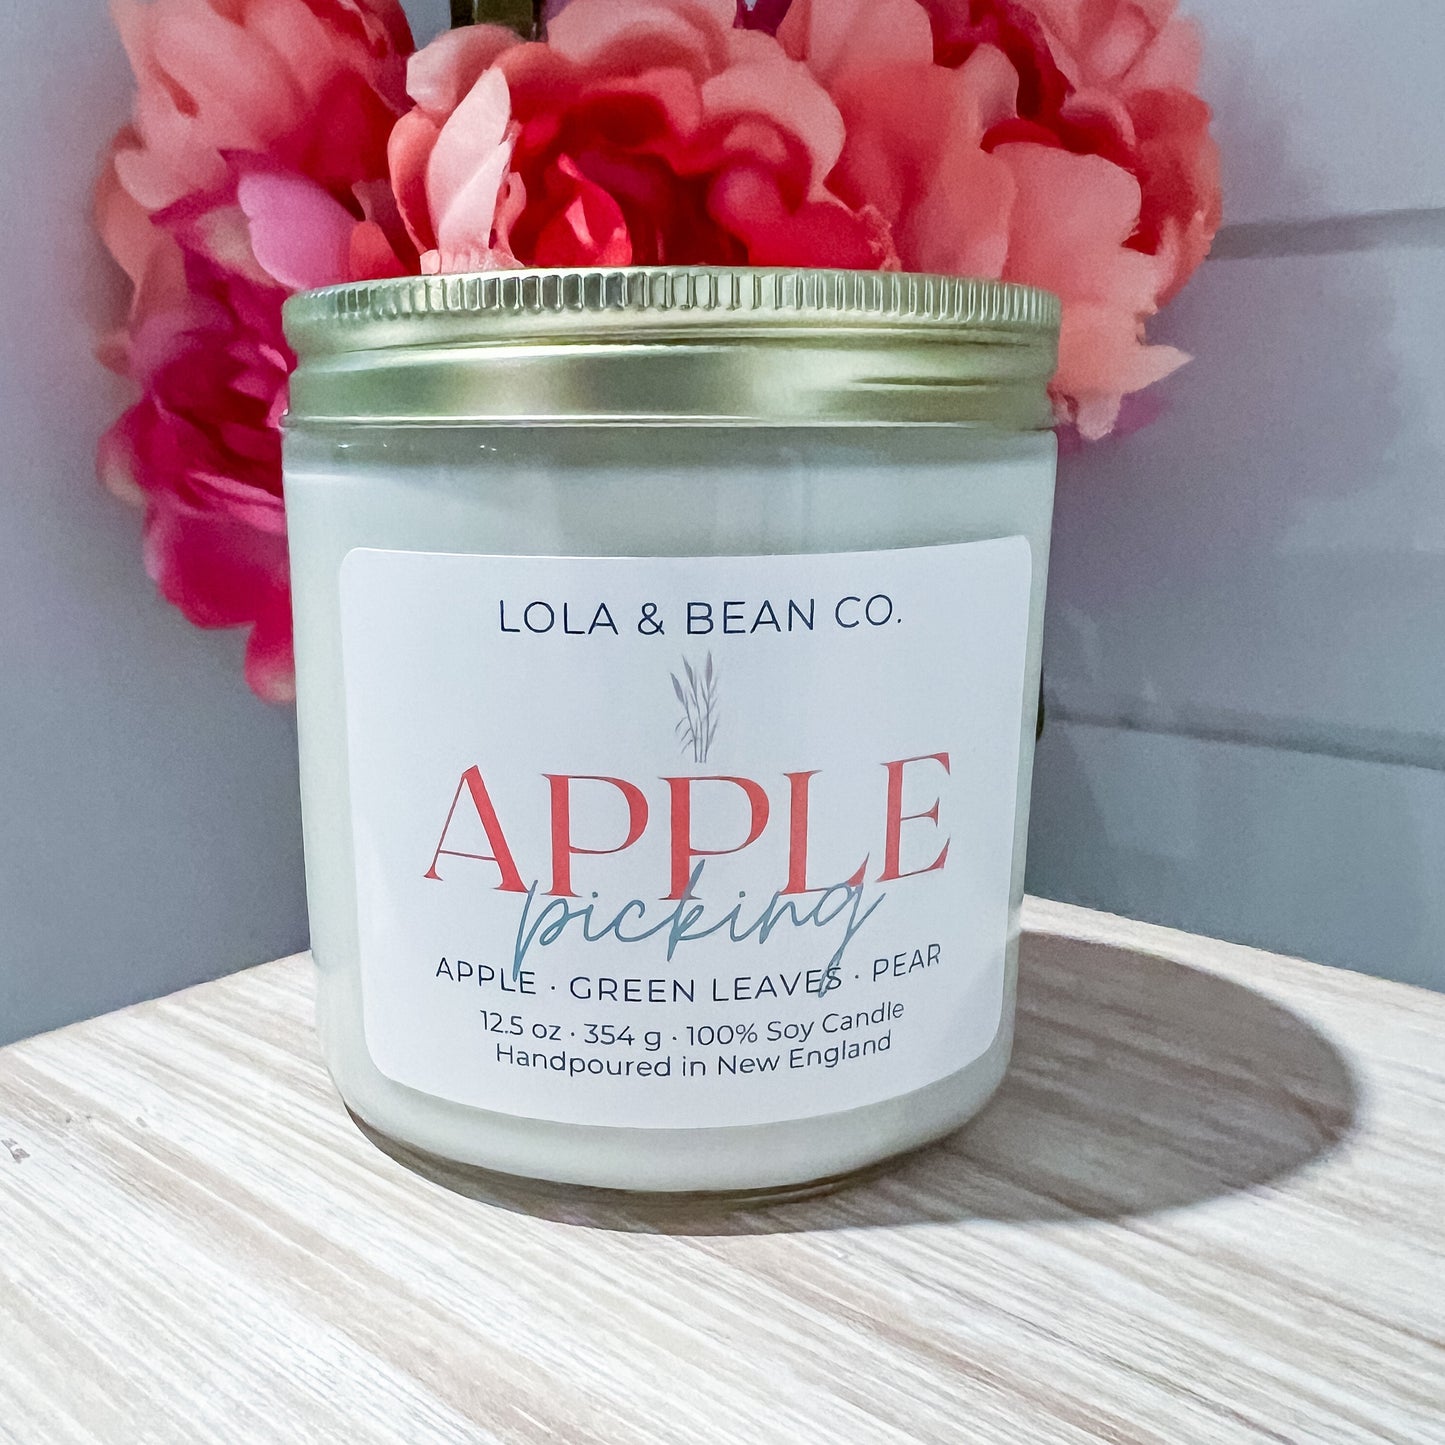 Apple Picking Soy Candle